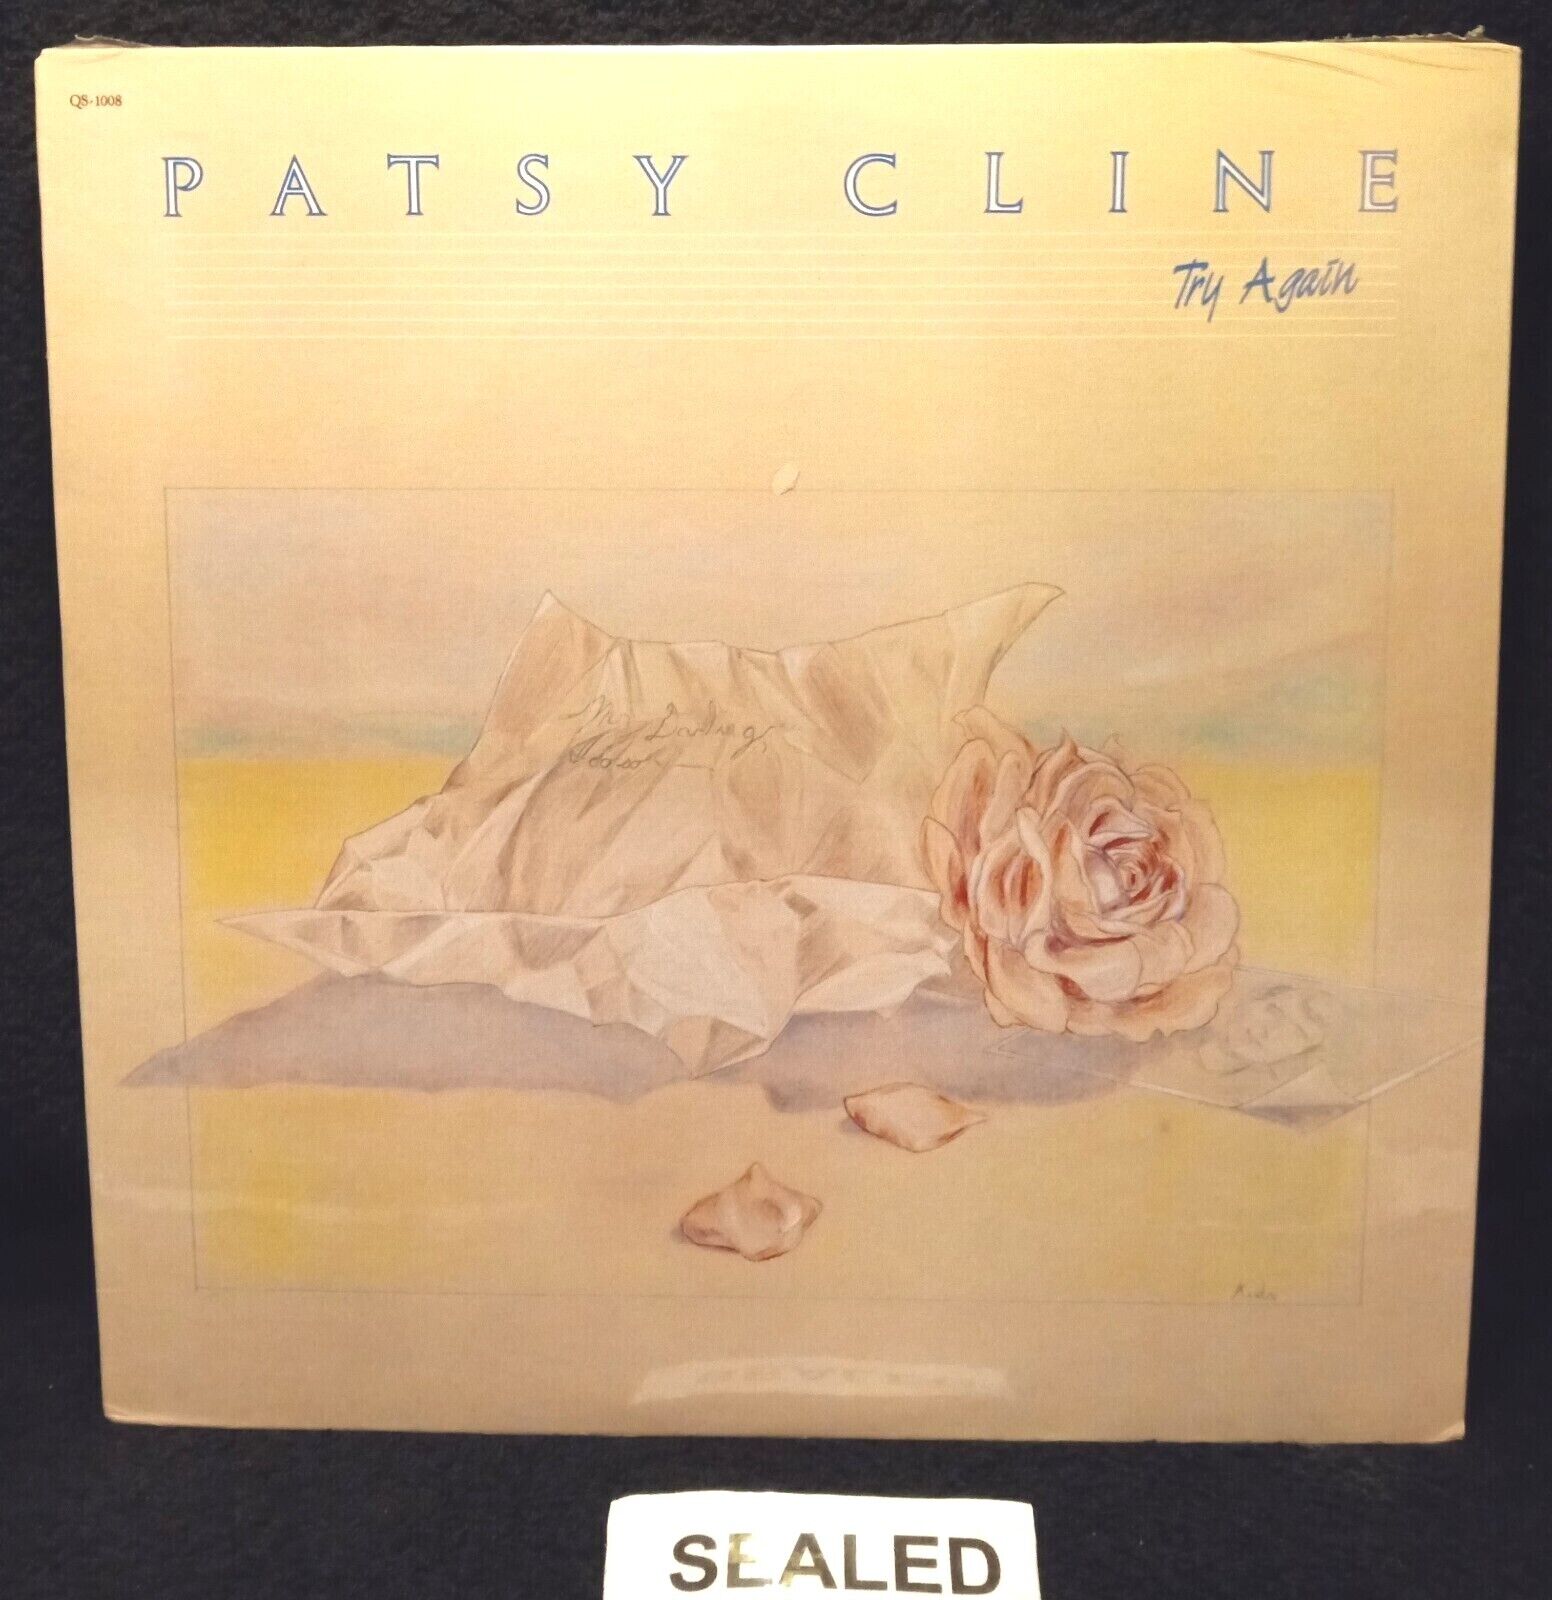 ALPHA BY ARTIST:CLINE, PATSY (TRY AGAIN) NEW:"CLASSIC COUNTRY" DISCOUNT-VINTAGE-VINYL-LP LOT ($5 NO LIMIT SHIP)  4-09-24